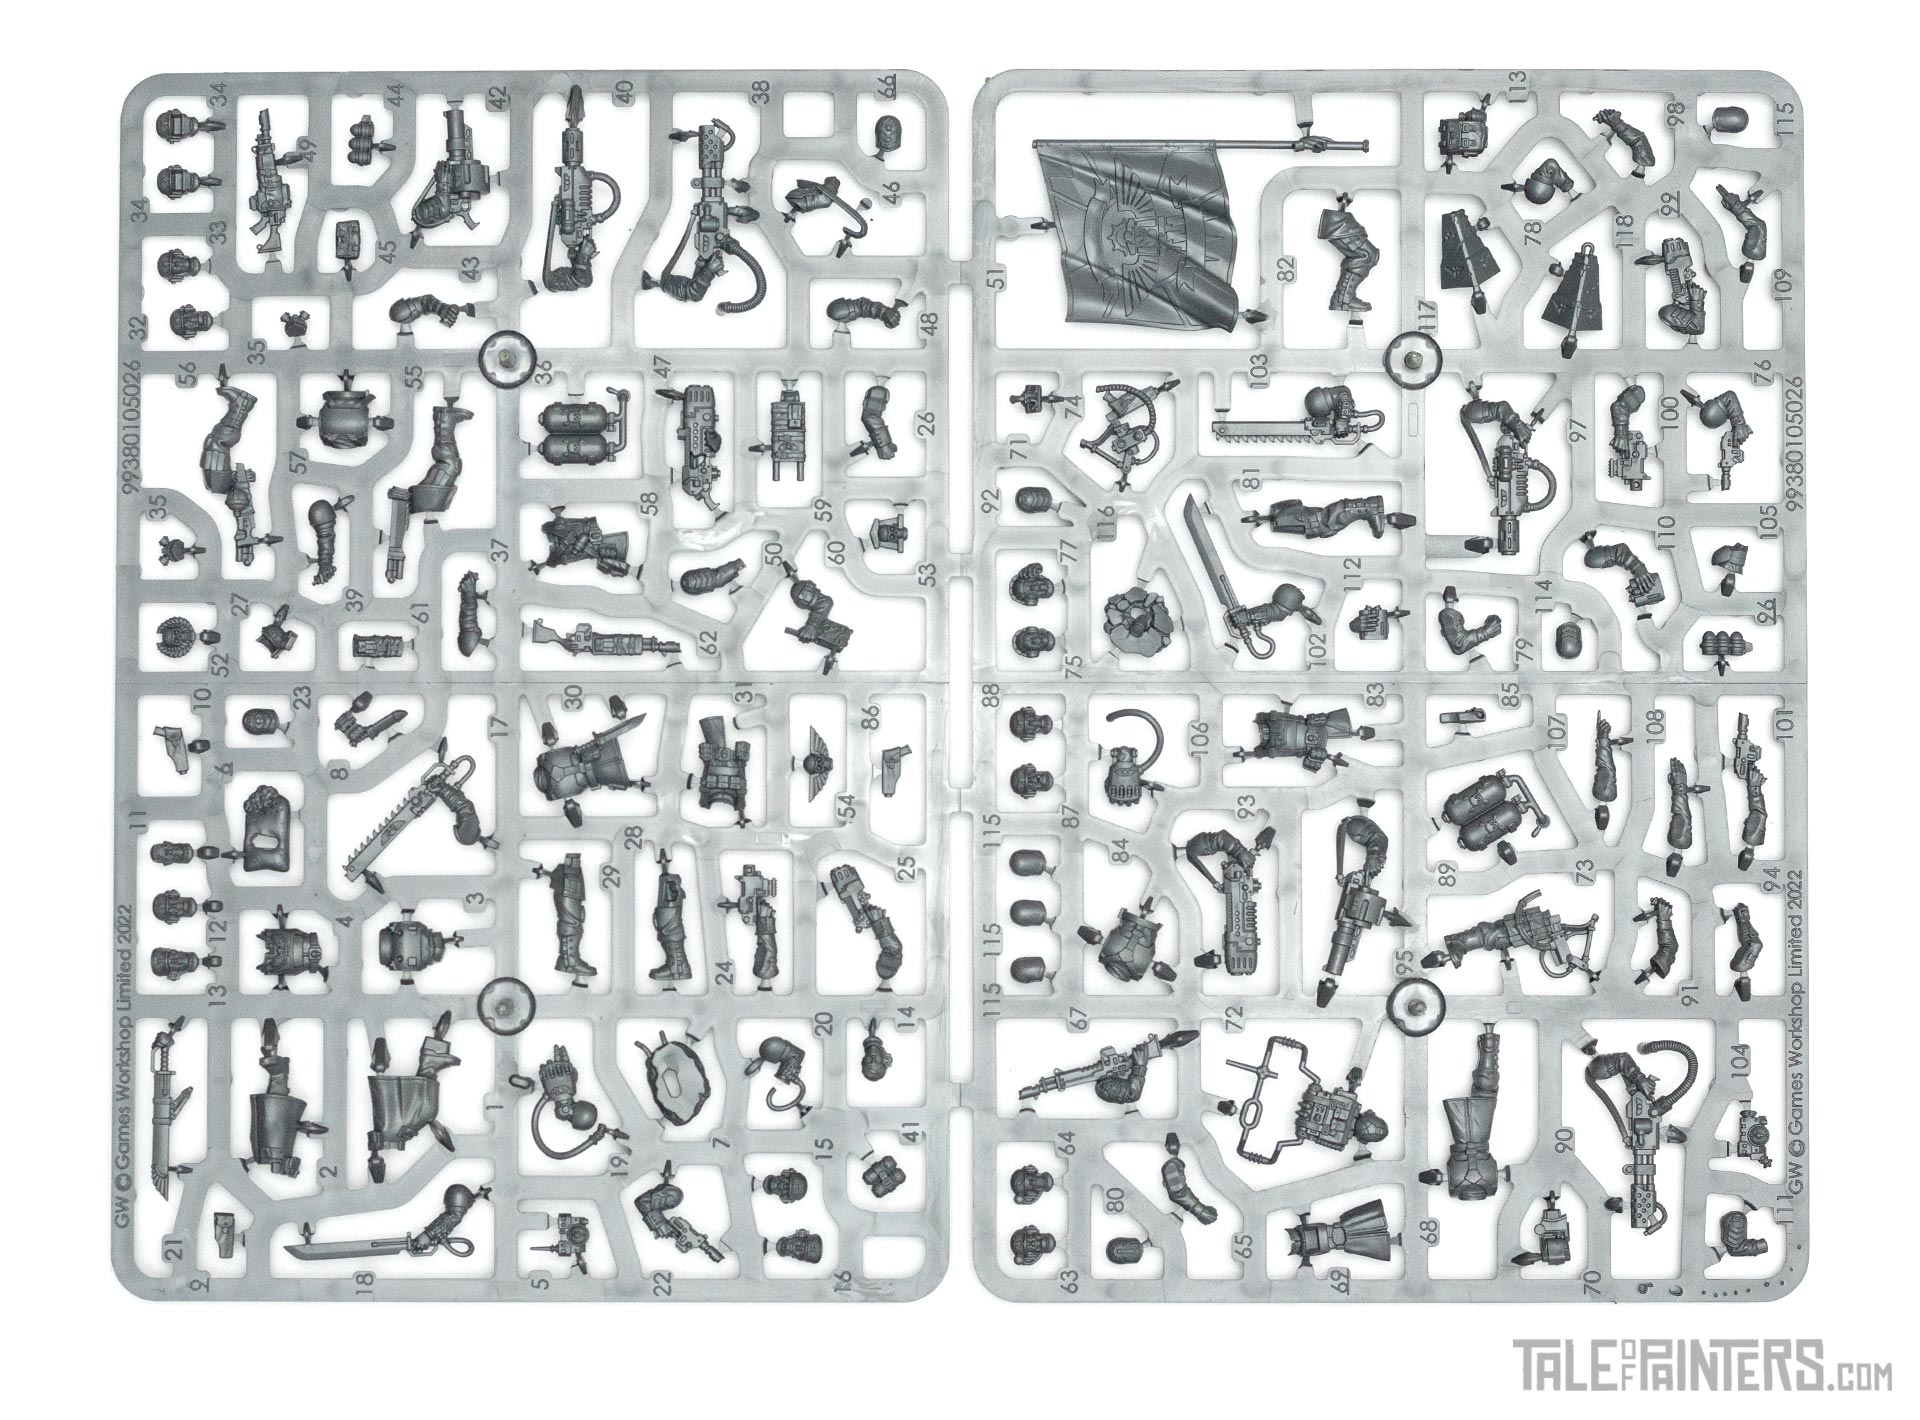 New 2022 Cadian Command Squad Sprue from the Astra Militarum Army Set